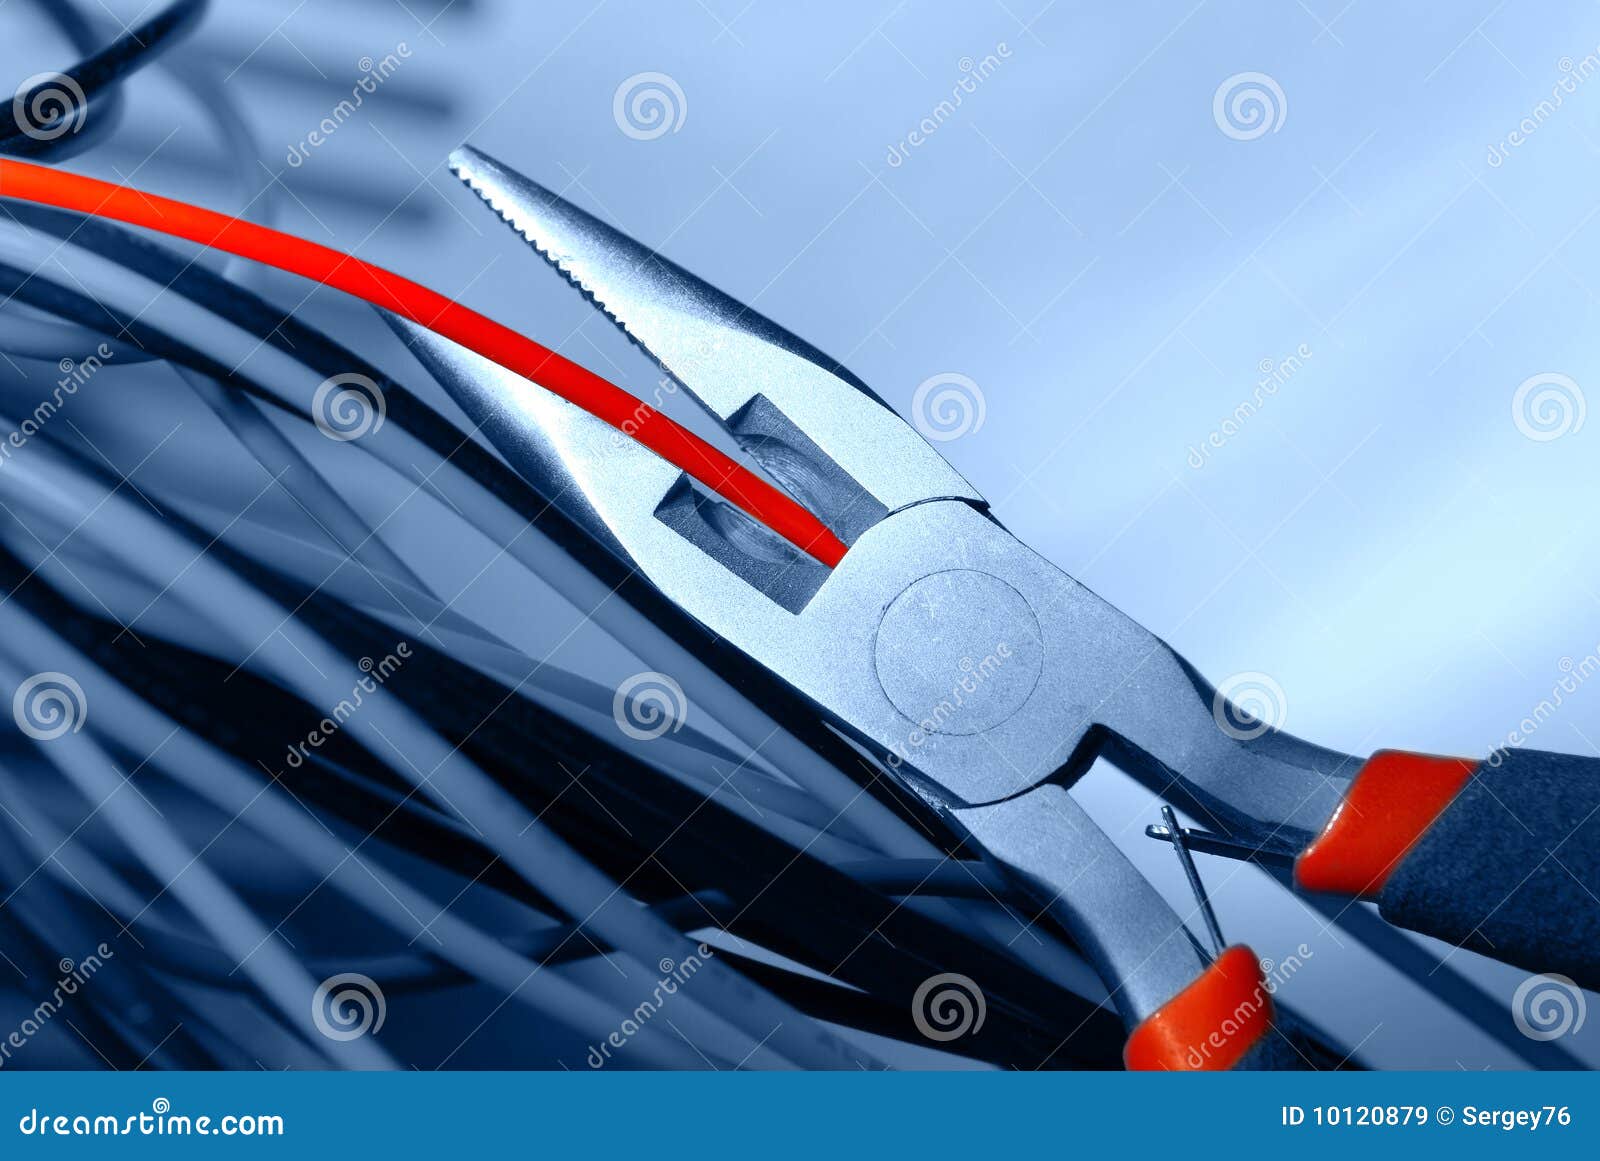 pliers and cable